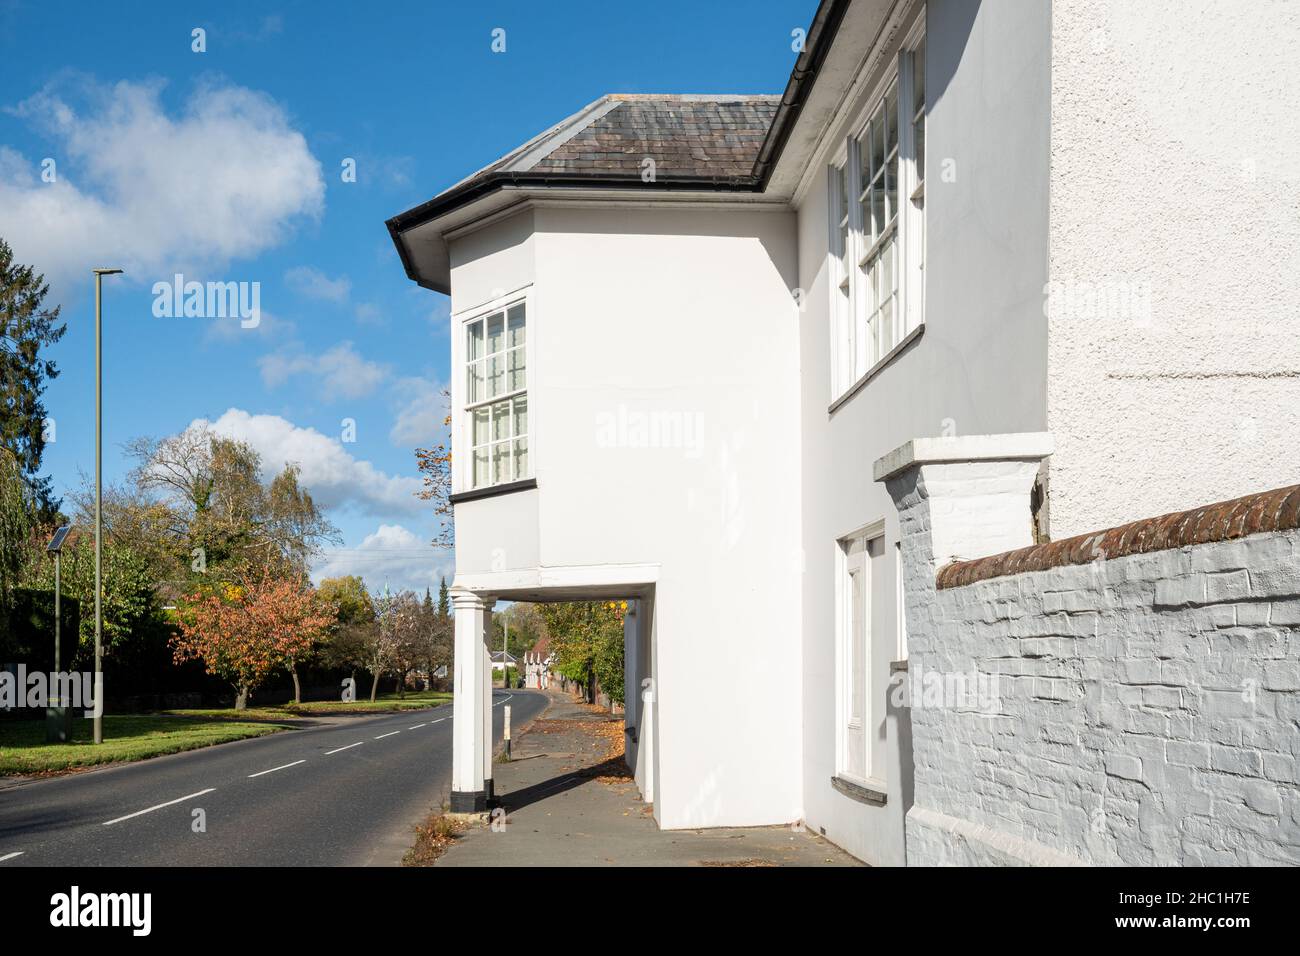 Unusual white-washed house with pillars supporting the first floor over the pavement in Shalford village, Surrey, England, UK Stock Photo